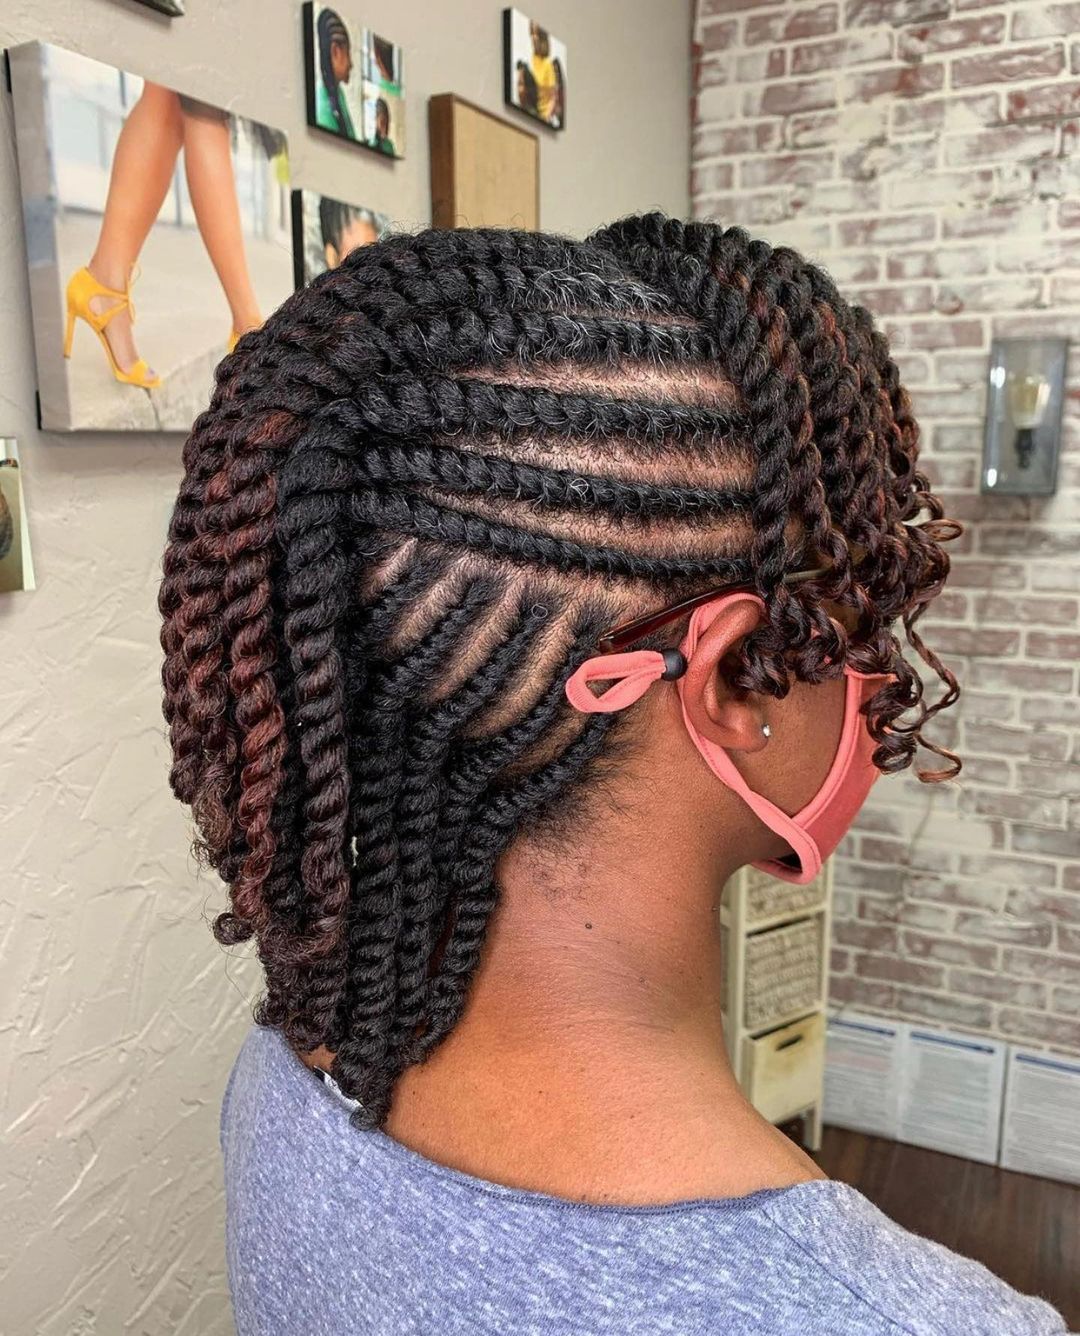 1. Two Sides Flat Twist Weaves On Individual Twists